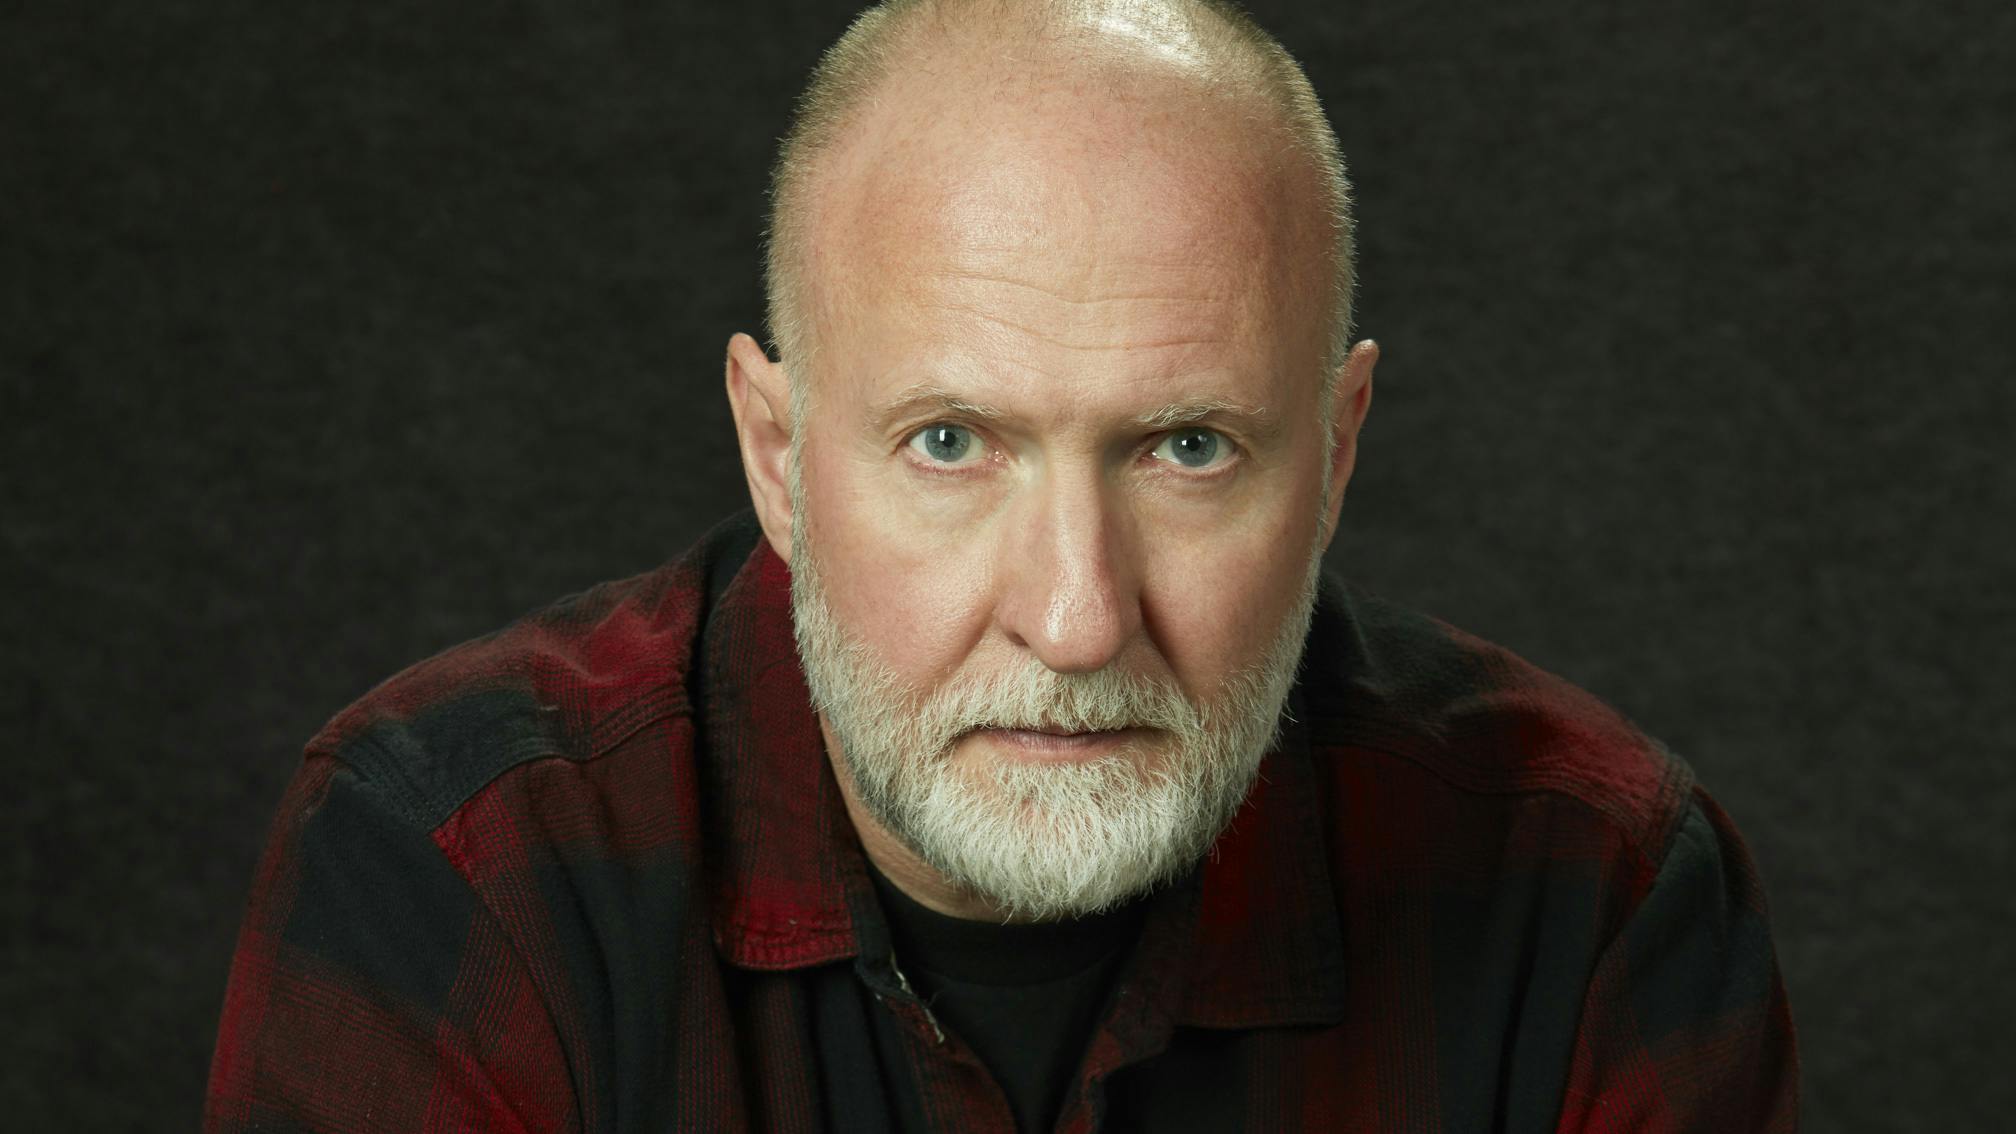 Bob Mould: "To stand in front of 100 people you don’t know, scream bloody murder and throw stuff around… that’s a weird way of working your sh*t out, right?"